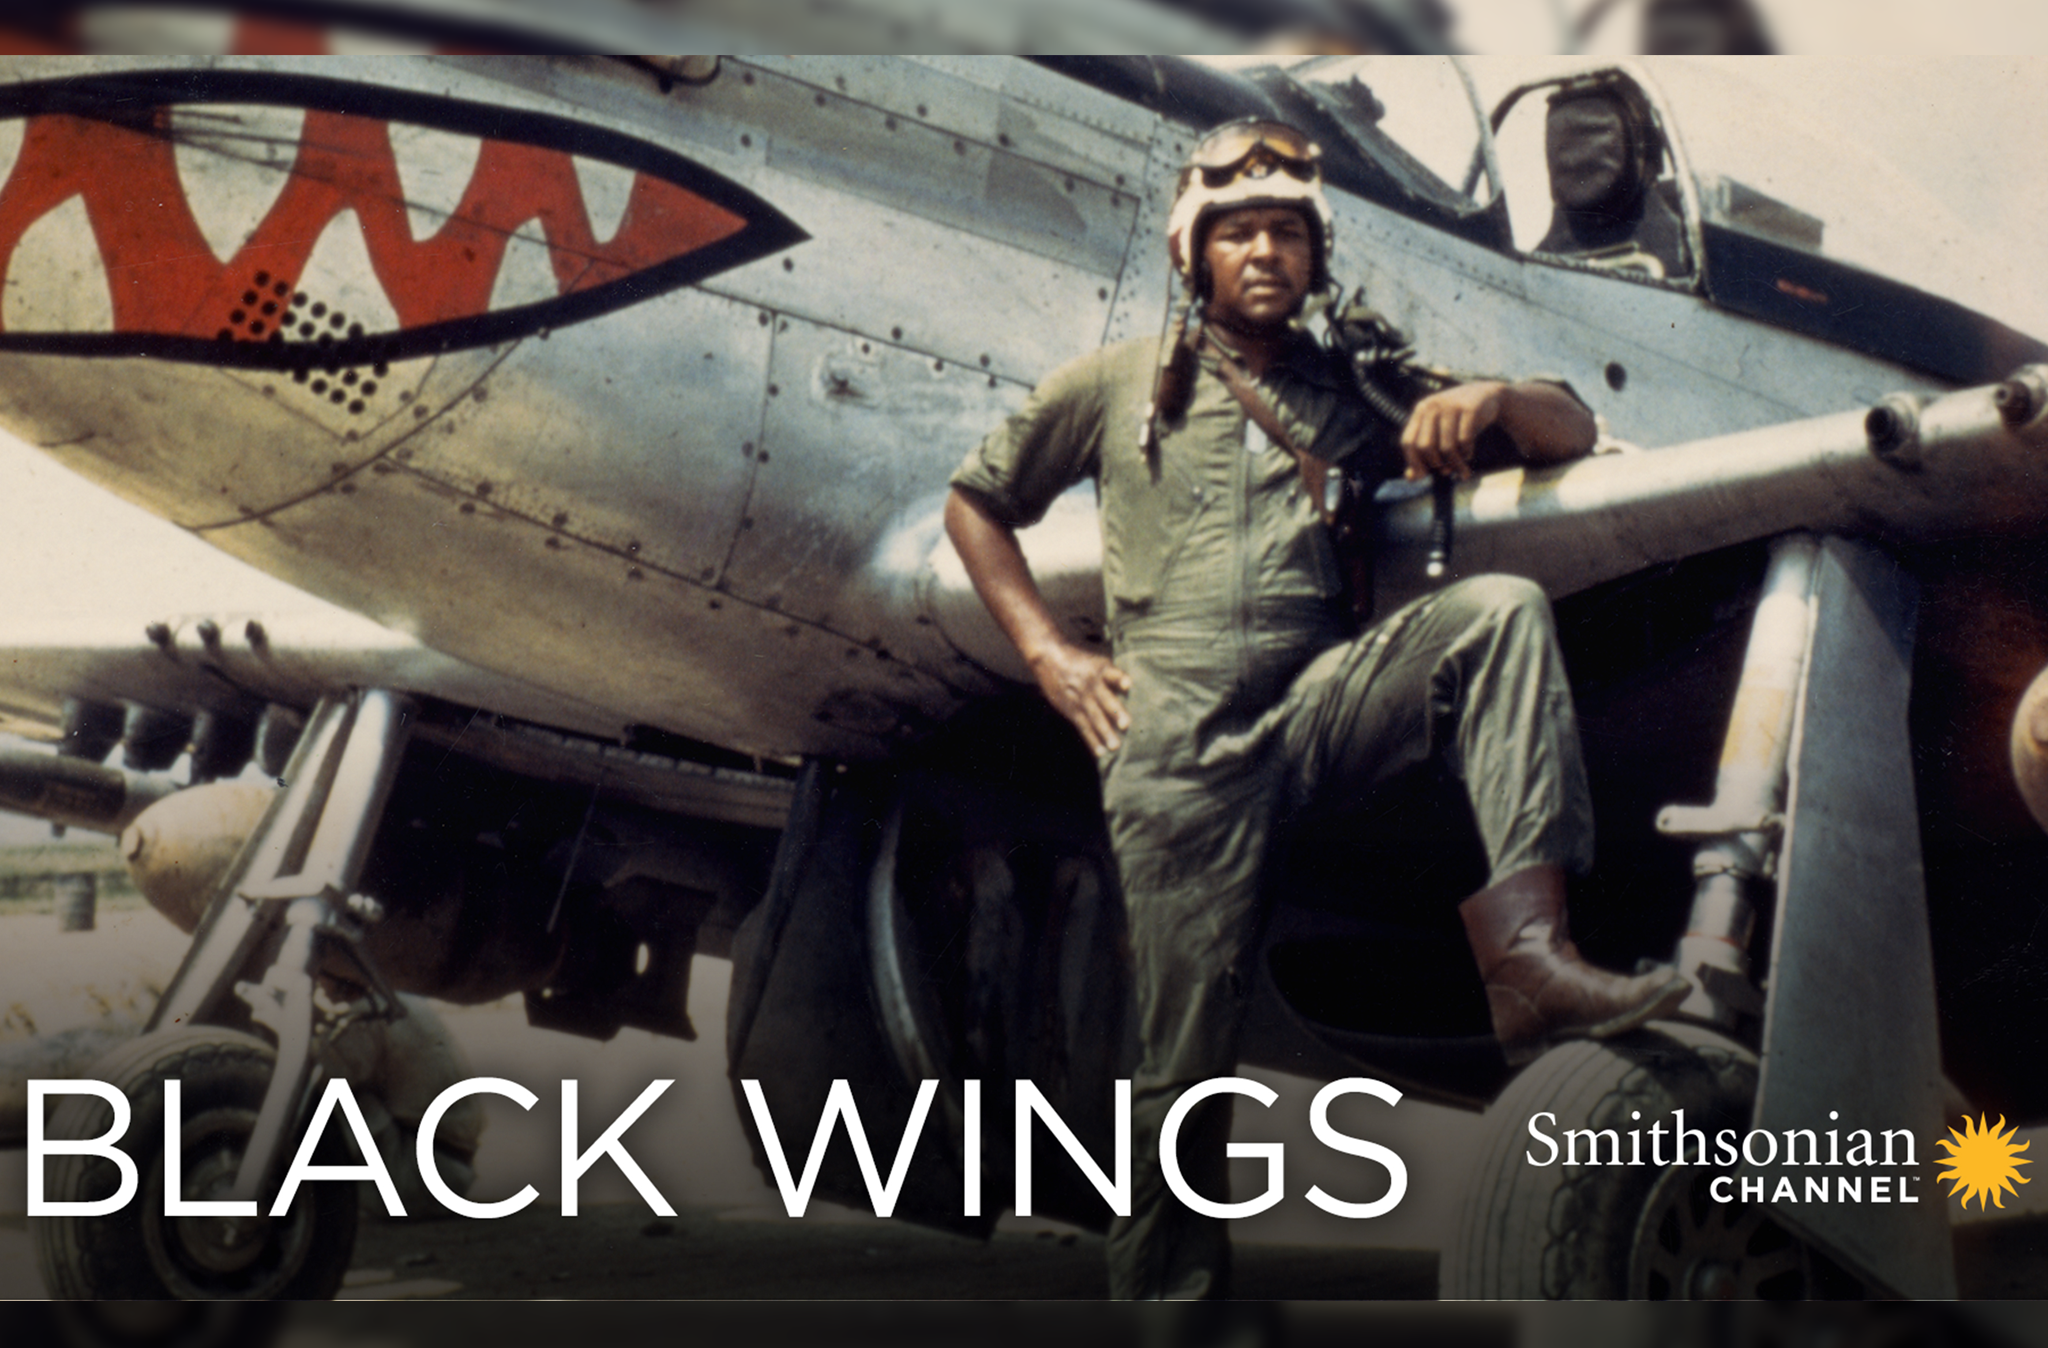 Smithsonian Channel Graphic for the film. An African American man in a pilot uniform standing beside an airplane.